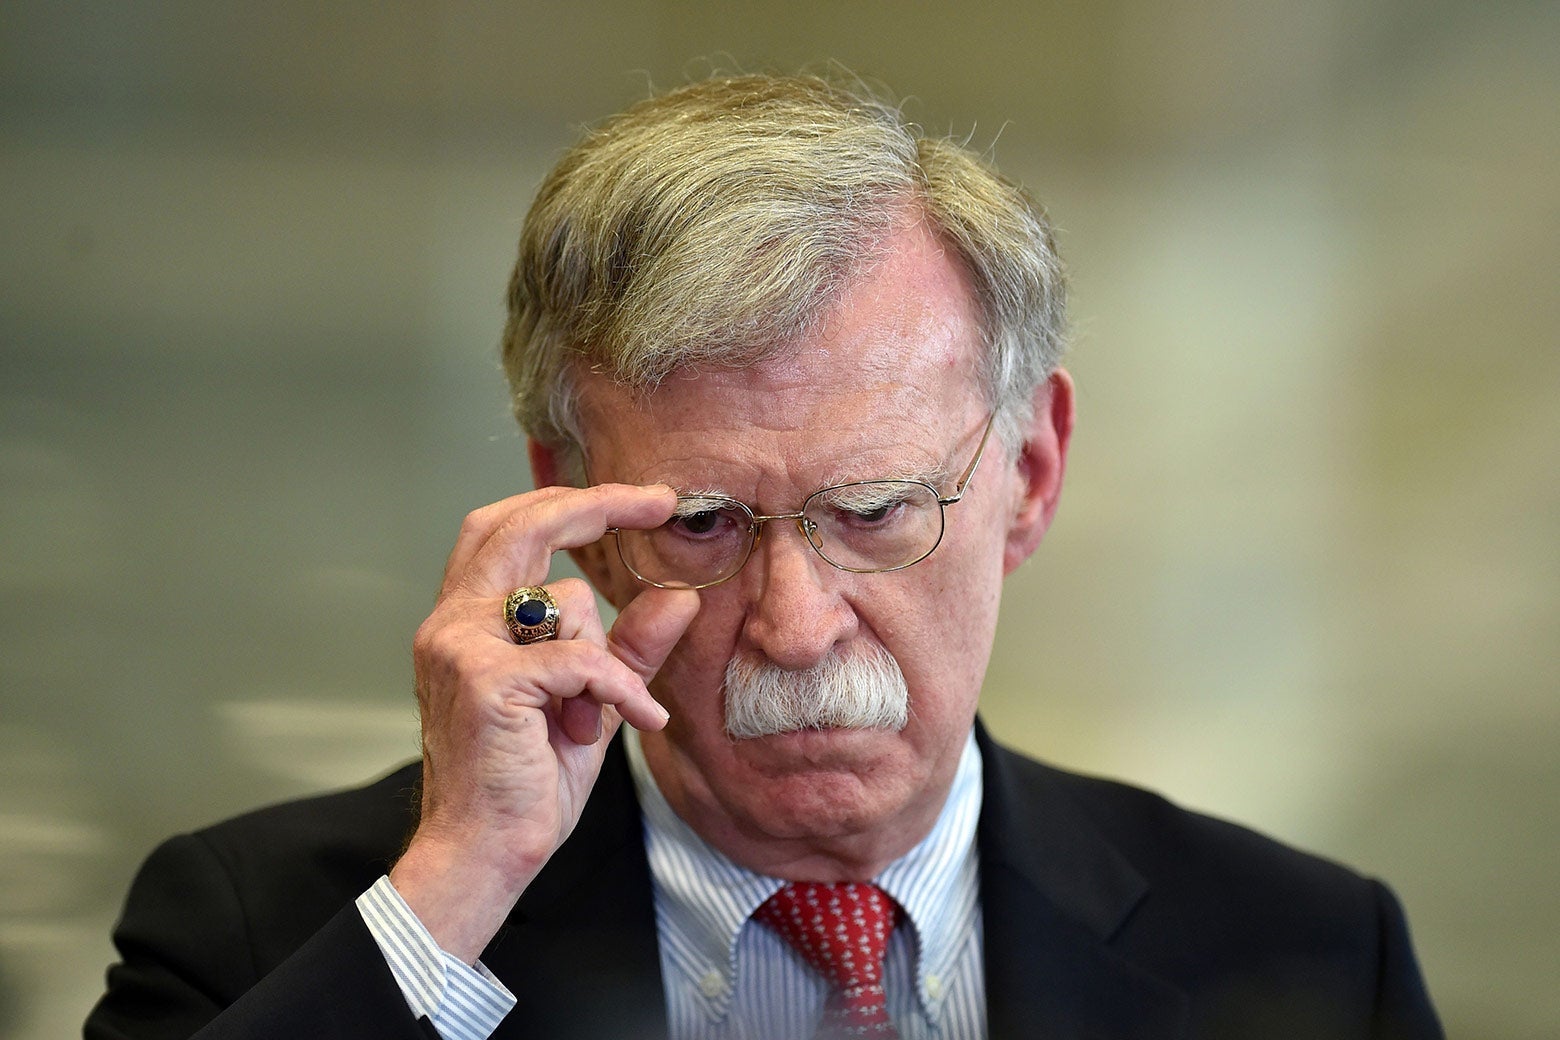 Bolton adjusts his glasses as he looks off-camera.